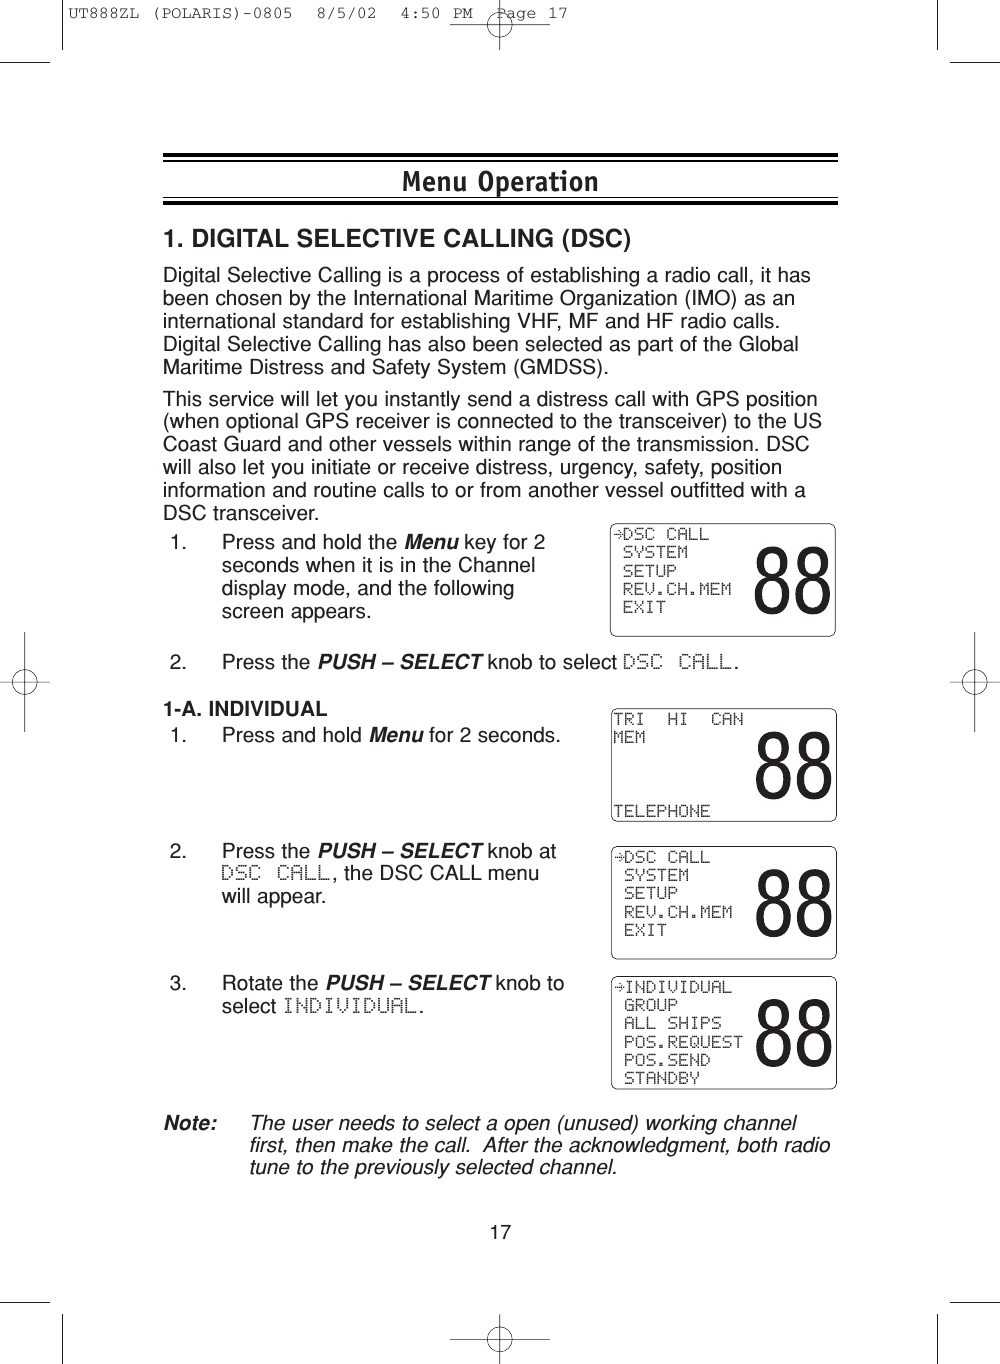 171. DIGITAL SELECTIVE CALLING (DSC)Digital Selective Calling is a process of establishing a radio call, it hasbeen chosen by the International Maritime Organization (IMO) as aninternational standard for establishing VHF, MF and HF radio calls.Digital Selective Calling has also been selected as part of the GlobalMaritime Distress and Safety System (GMDSS).This service will let you instantly send a distress call with GPS position(when optional GPS receiver is connected to the transceiver) to the USCoast Guard and other vessels within range of the transmission. DSCwill also let you initiate or receive distress, urgency, safety, positioninformation and routine calls to or from another vessel outfitted with aDSC transceiver.1. Press and hold the Menu key for 2seconds when it is in the Channeldisplay mode, and the followingscreen appears.2. Press the PUSH – SELECT knob to select DSC CALL.  DSC CALL SYSTEM SETUP REV.CH.MEM EXIT1-A. INDIVIDUAL1. Press and hold Menu for 2 seconds.2. Press the PUSH – SELECT knob atDSC CALL, the DSC CALL menuwill appear.3. Rotate the PUSH – SELECT knob toselect INDIVIDUAL.Note: The user needs to select a open (unused) working channelfirst, then make the call.  After the acknowledgment, both radiotune to the previously selected channel.TRI  HI  CANMEMTELEPHONE DSC CALL SYSTEM SETUP REV.CH.MEM EXIT INDIVIDUAL GROUP ALL SHIPS POS.REQUEST POS.SEND STANDBYMenu OperationUT888ZL (POLARIS)-0805  8/5/02  4:50 PM  Page 17